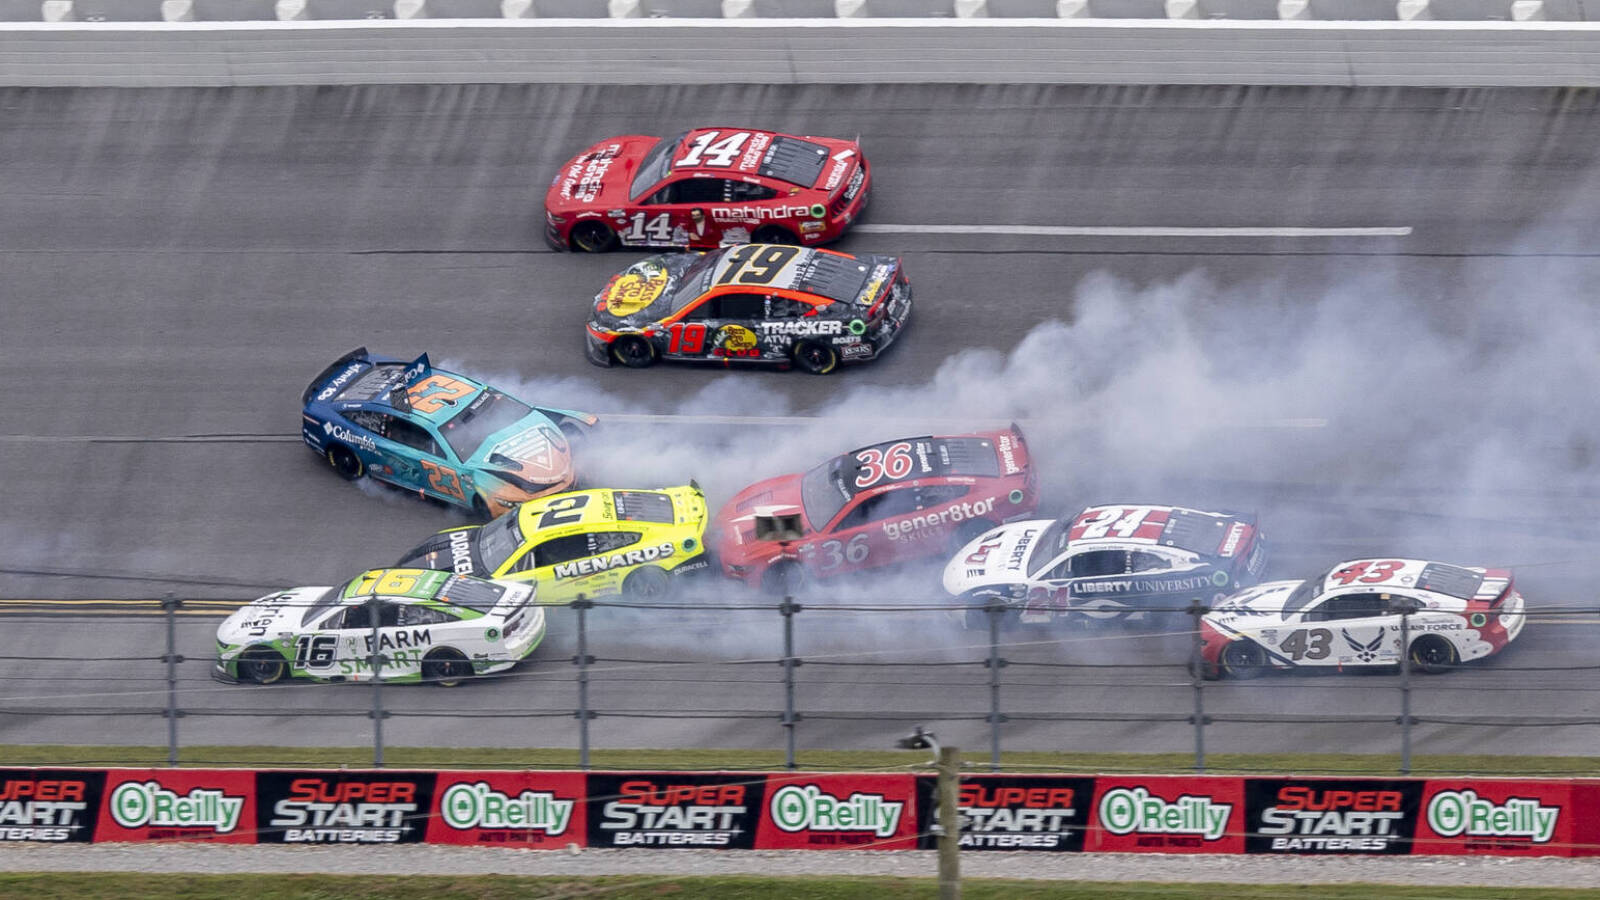 NASCAR weekend in Talladega was marred by violent crashes